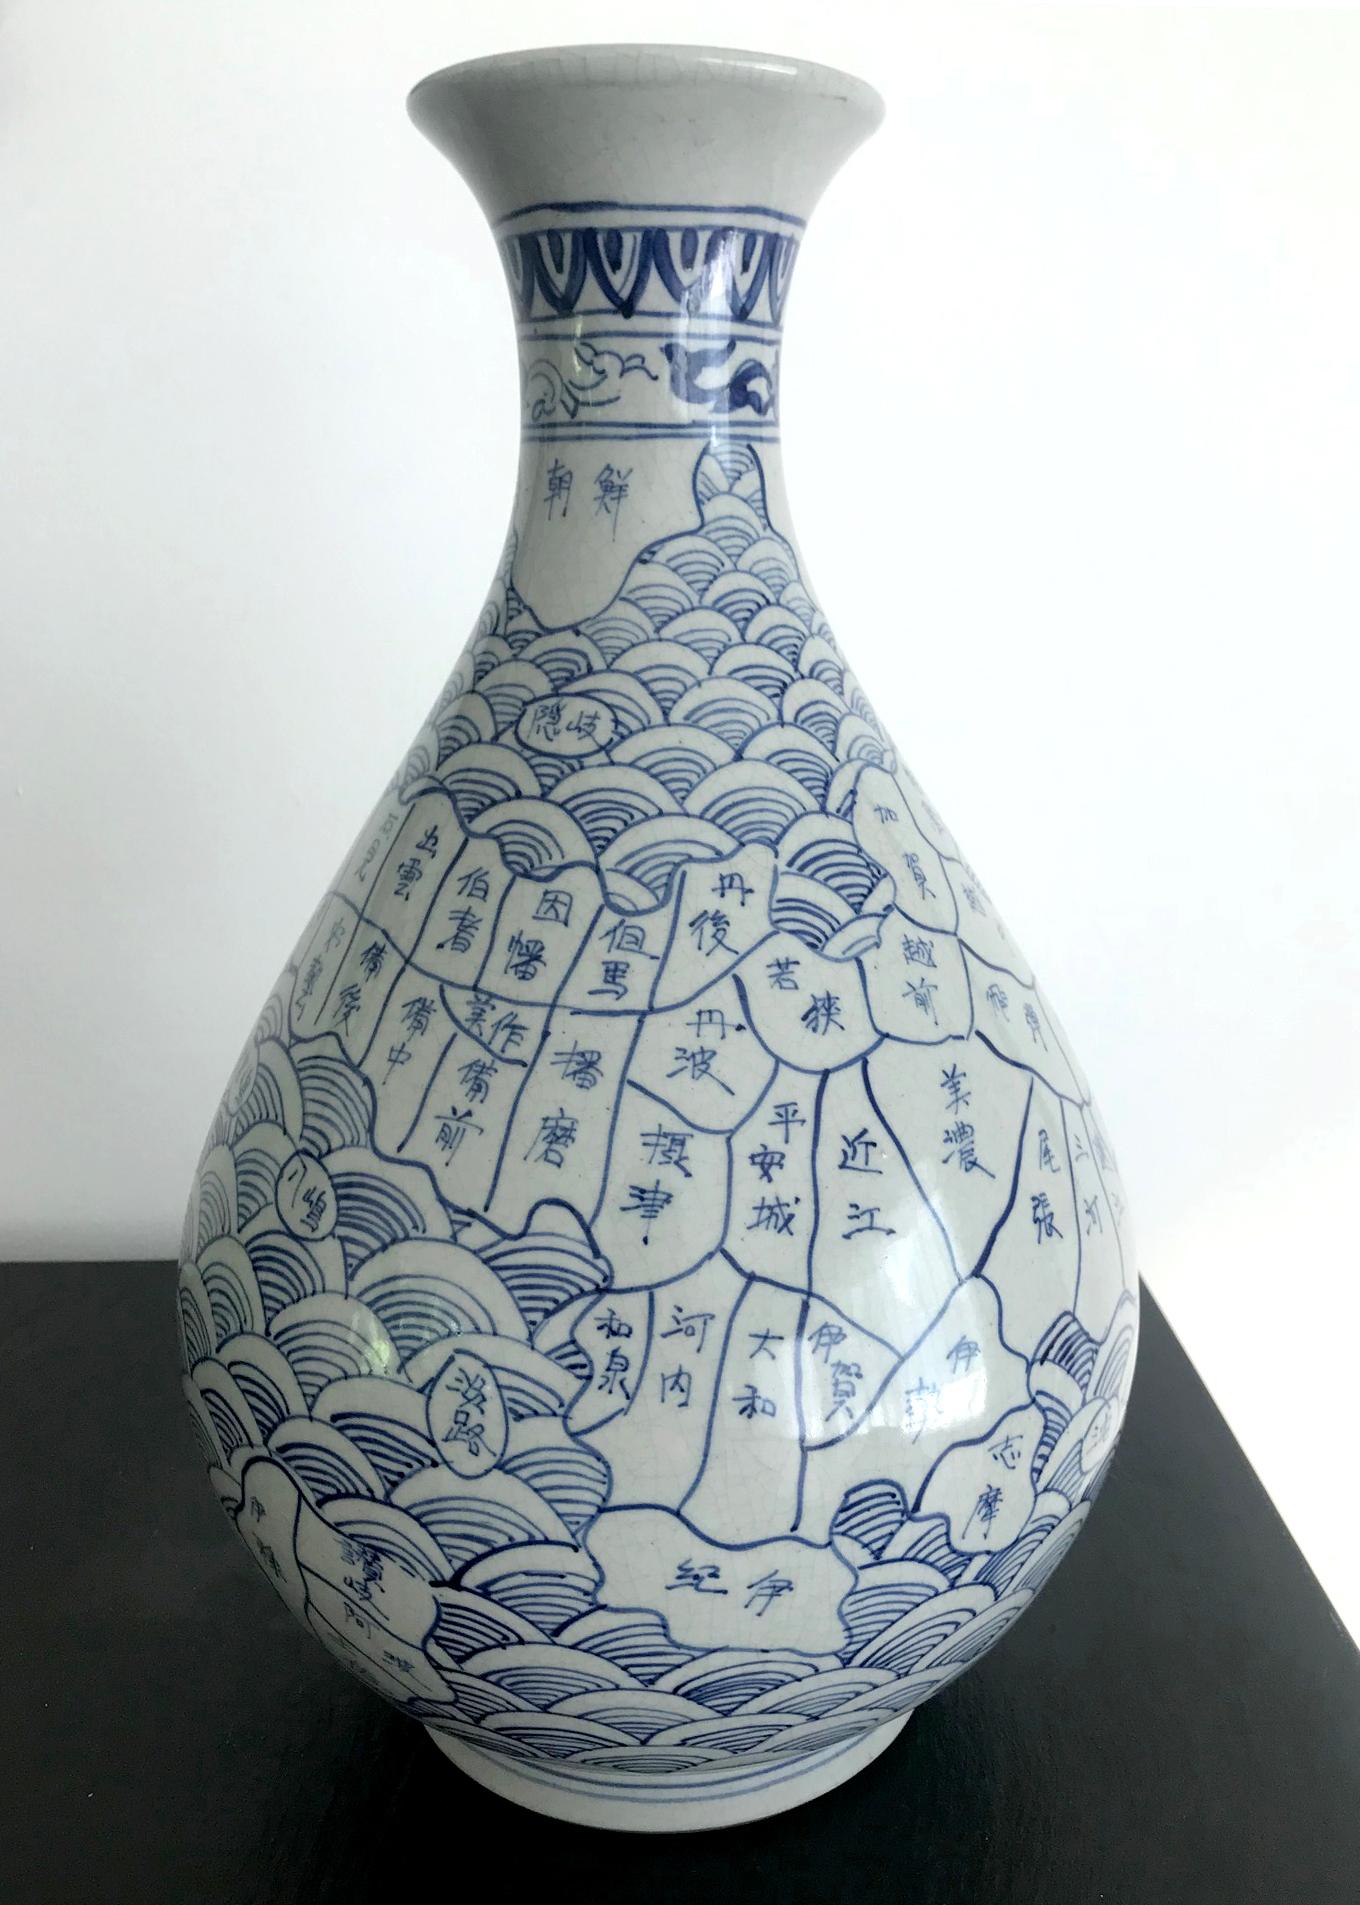 A large and unusual porcelain vase from Arita, Japan, circa Tenpo years (1830-1844) of Edo Period.
This piece of unusual blue and white Arita ware features the novel use of maps as ceramic decoration, a phenomena only appeared in Japan in the early